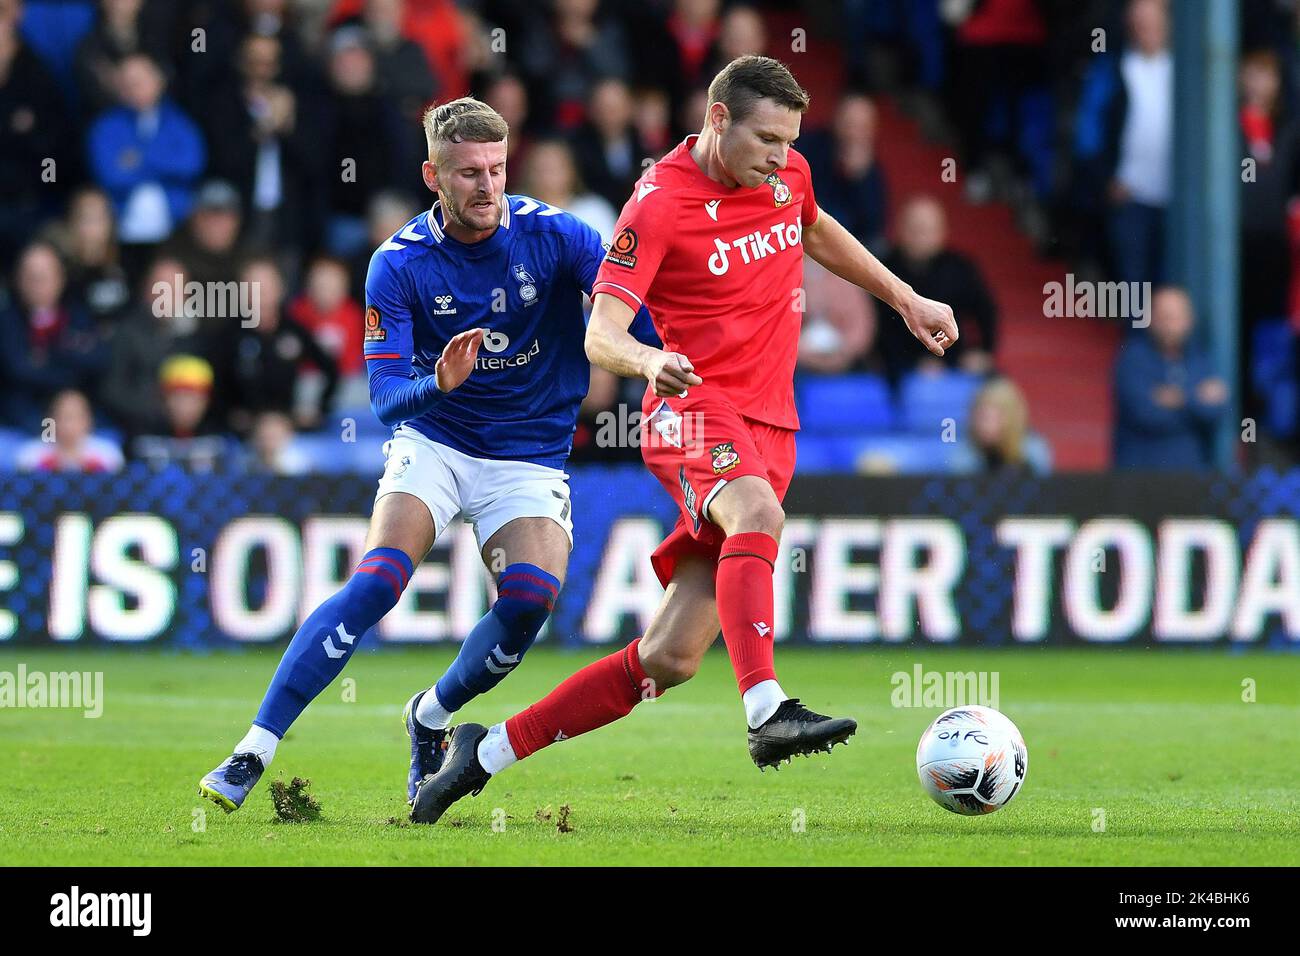 Oldham, UK. 1st October 2022during the Vanarama National League match between Oldham Athletic and Wrexham at Boundary Park, Oldham on Saturday 1st October 2022Jack Stobbs of Oldham Athletic tussles with Paul Mullin of Wrexham Football Club during the Vanarama National League match between Oldham Athletic and Wrexham at Boundary Park, Oldham on Saturday 1st October 2022during the Vanarama National League match between Oldham Athletic and Wrexham at Boundary Park, Oldham on Saturday 1st October 2022. Credit: MI News & Sport /Alamy Live News Stock Photo